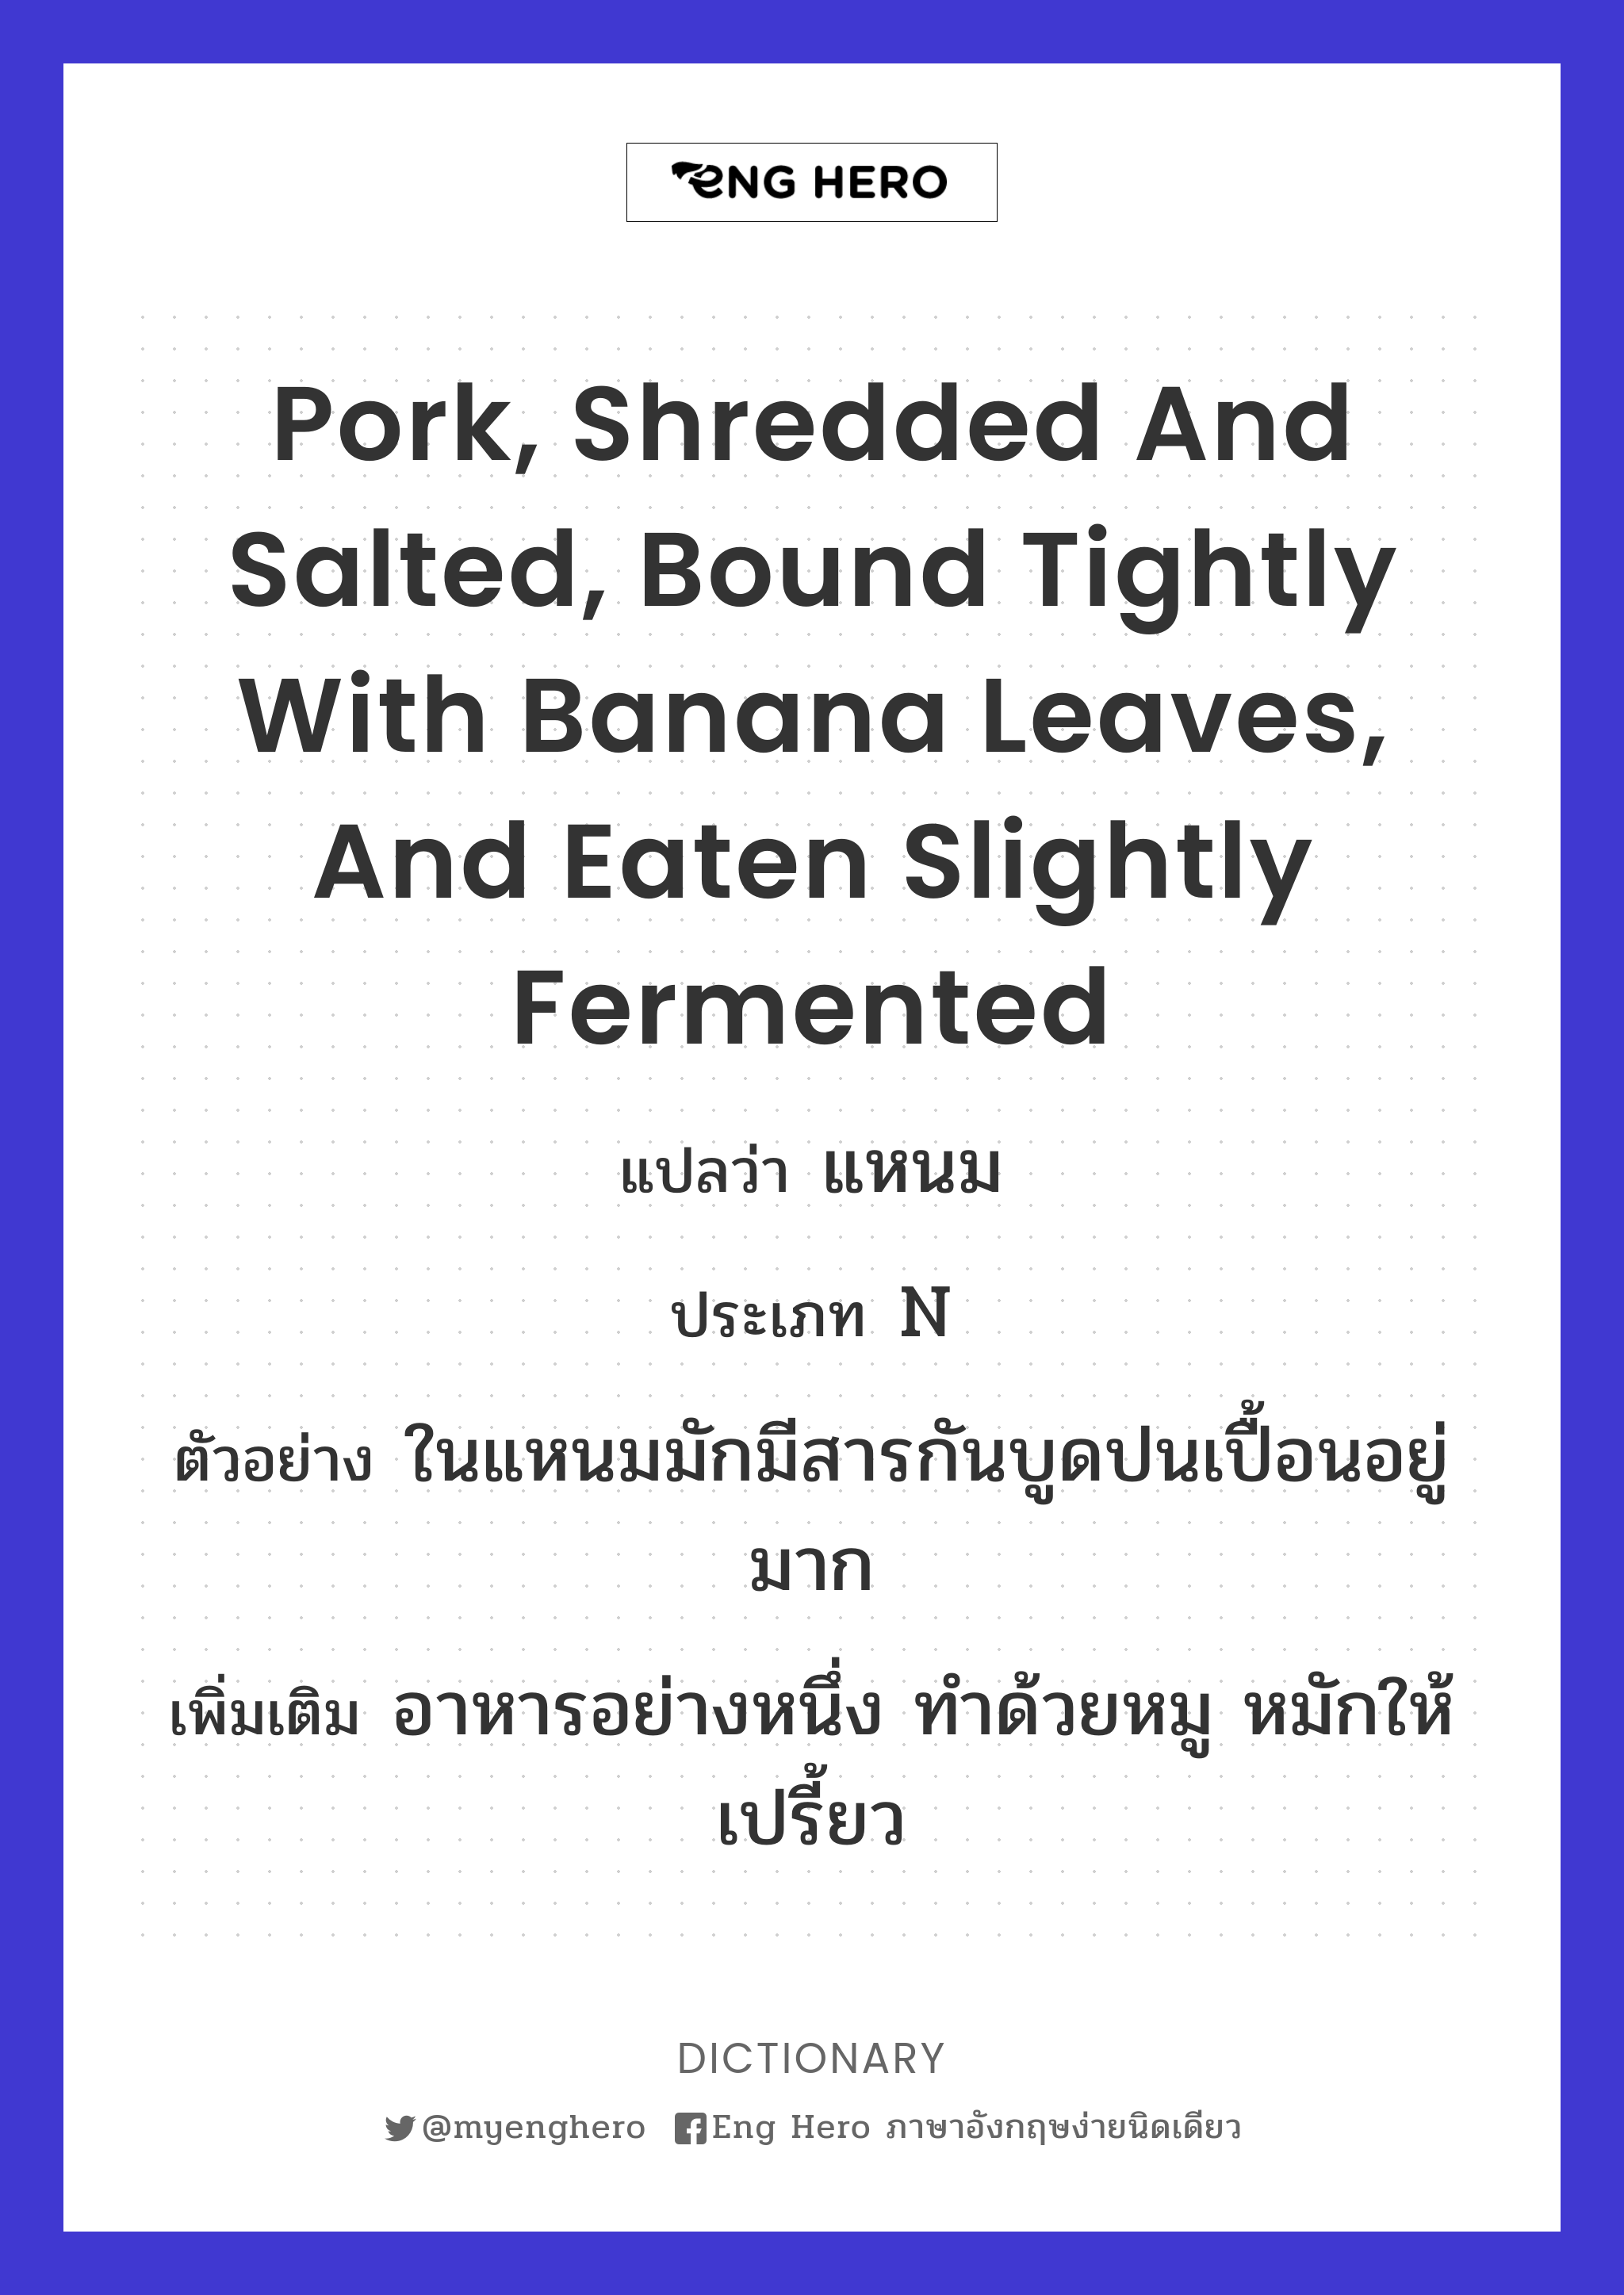 pork, shredded and salted, bound tightly with banana leaves, and eaten slightly fermented